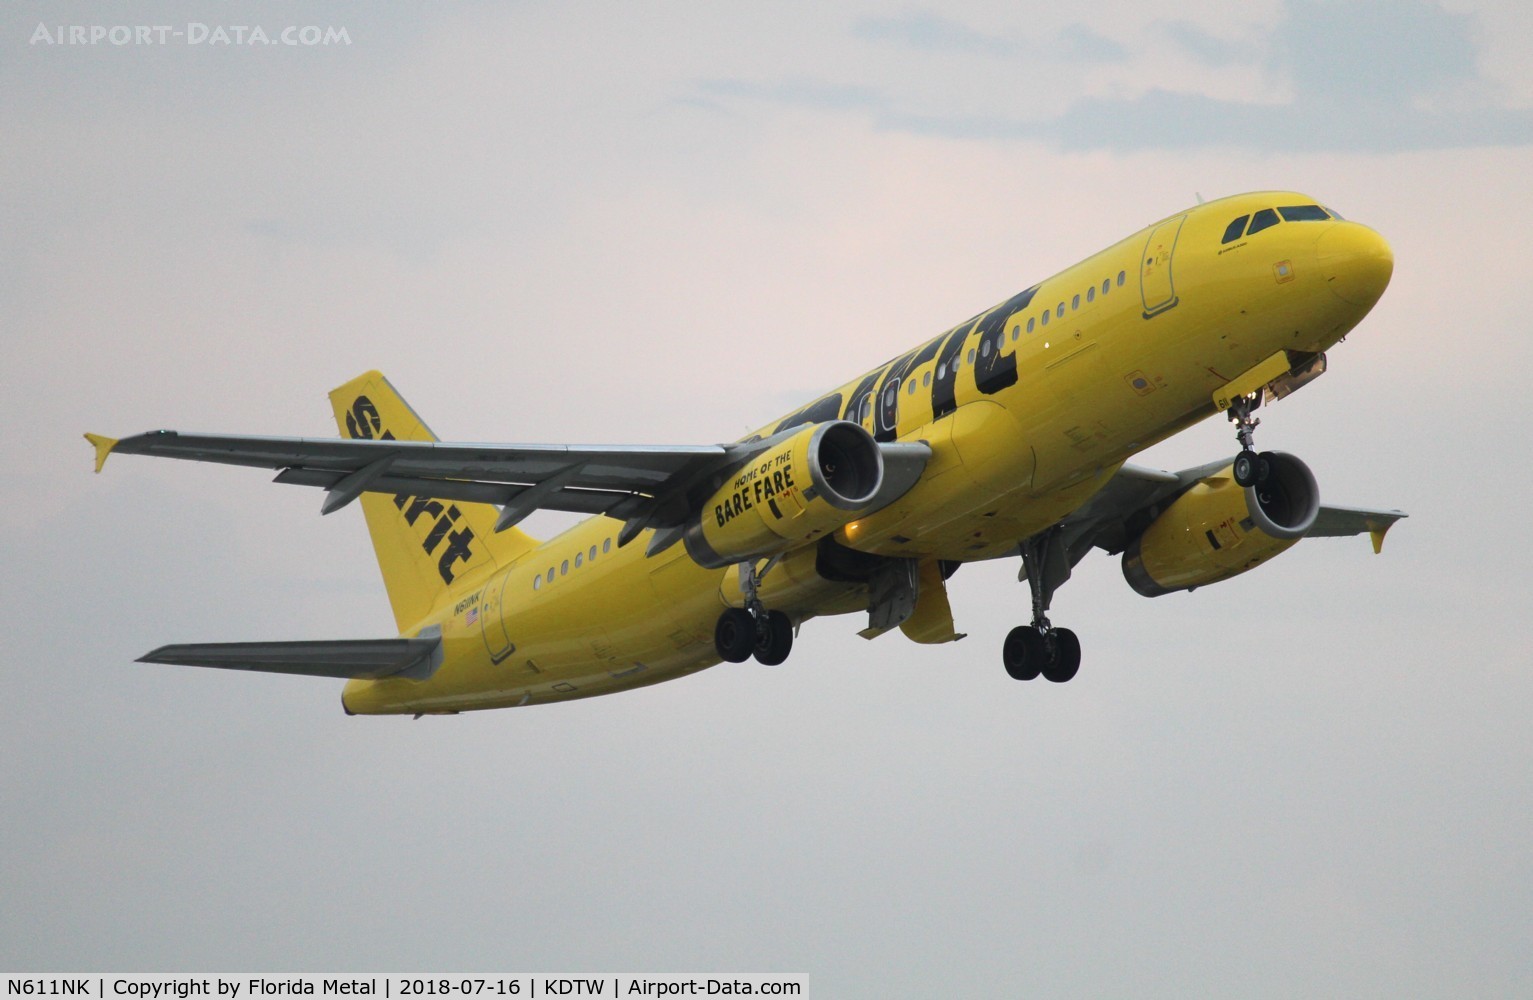 N611NK, 2011 Airbus A320-232 C/N 4996, NKS A320 yellow zx DTW-RSW